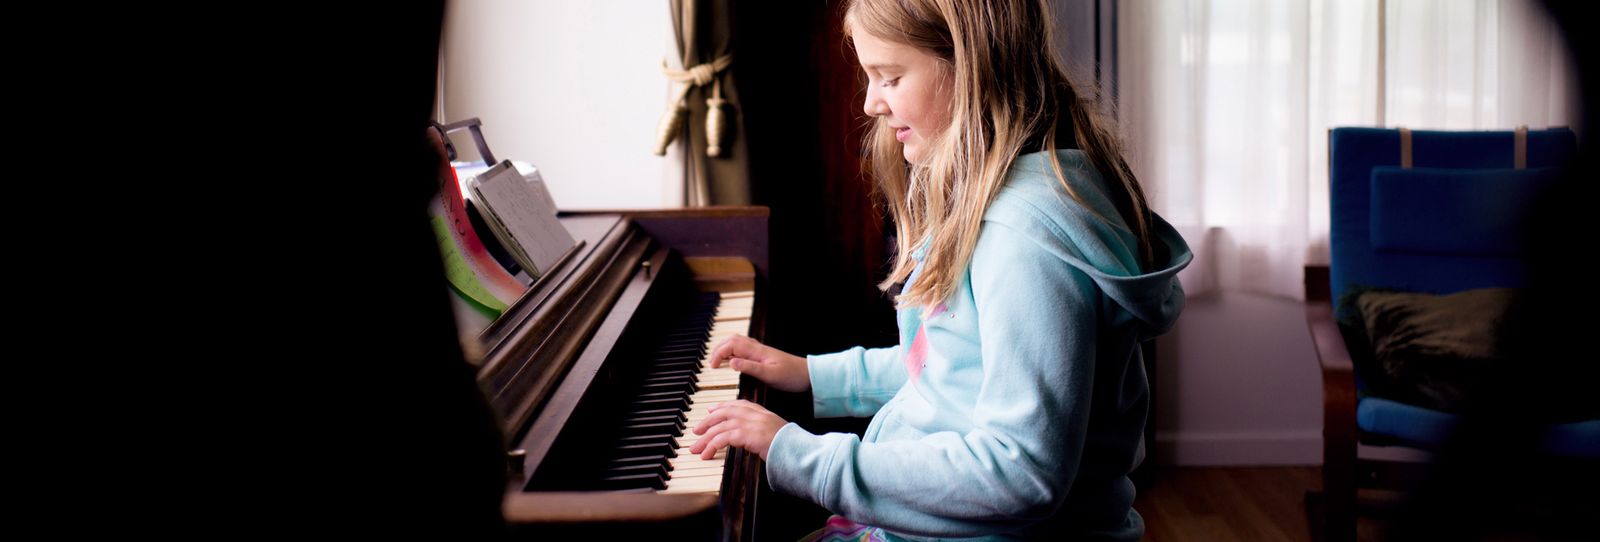 Find Local Beginner Piano Lessons and Start Playing Today